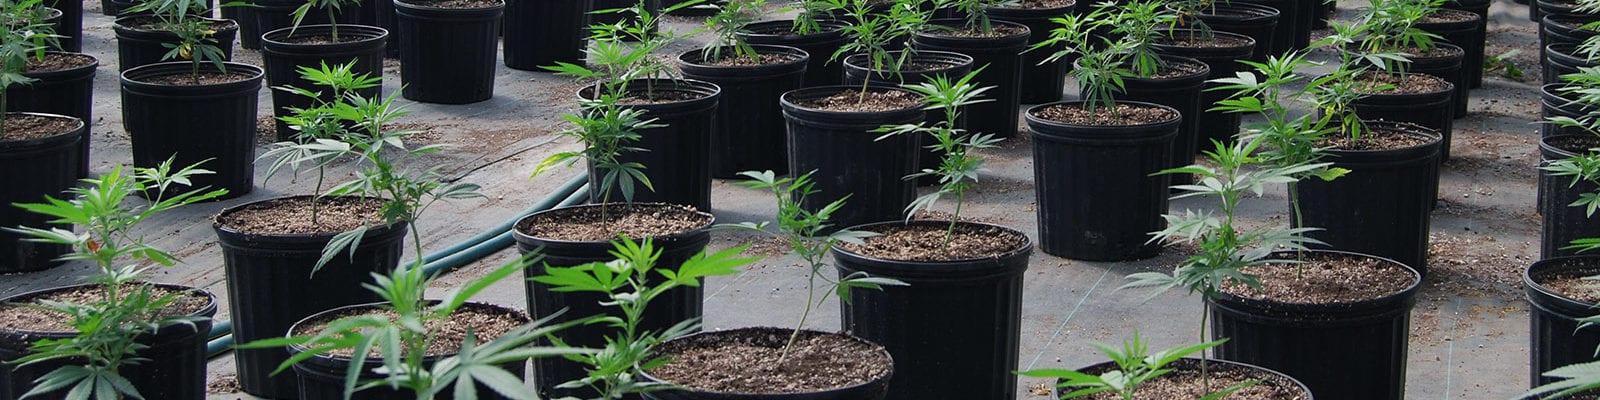 Cannabis plants lined up inside of a medical marijuana greenhouse in Oregon state.